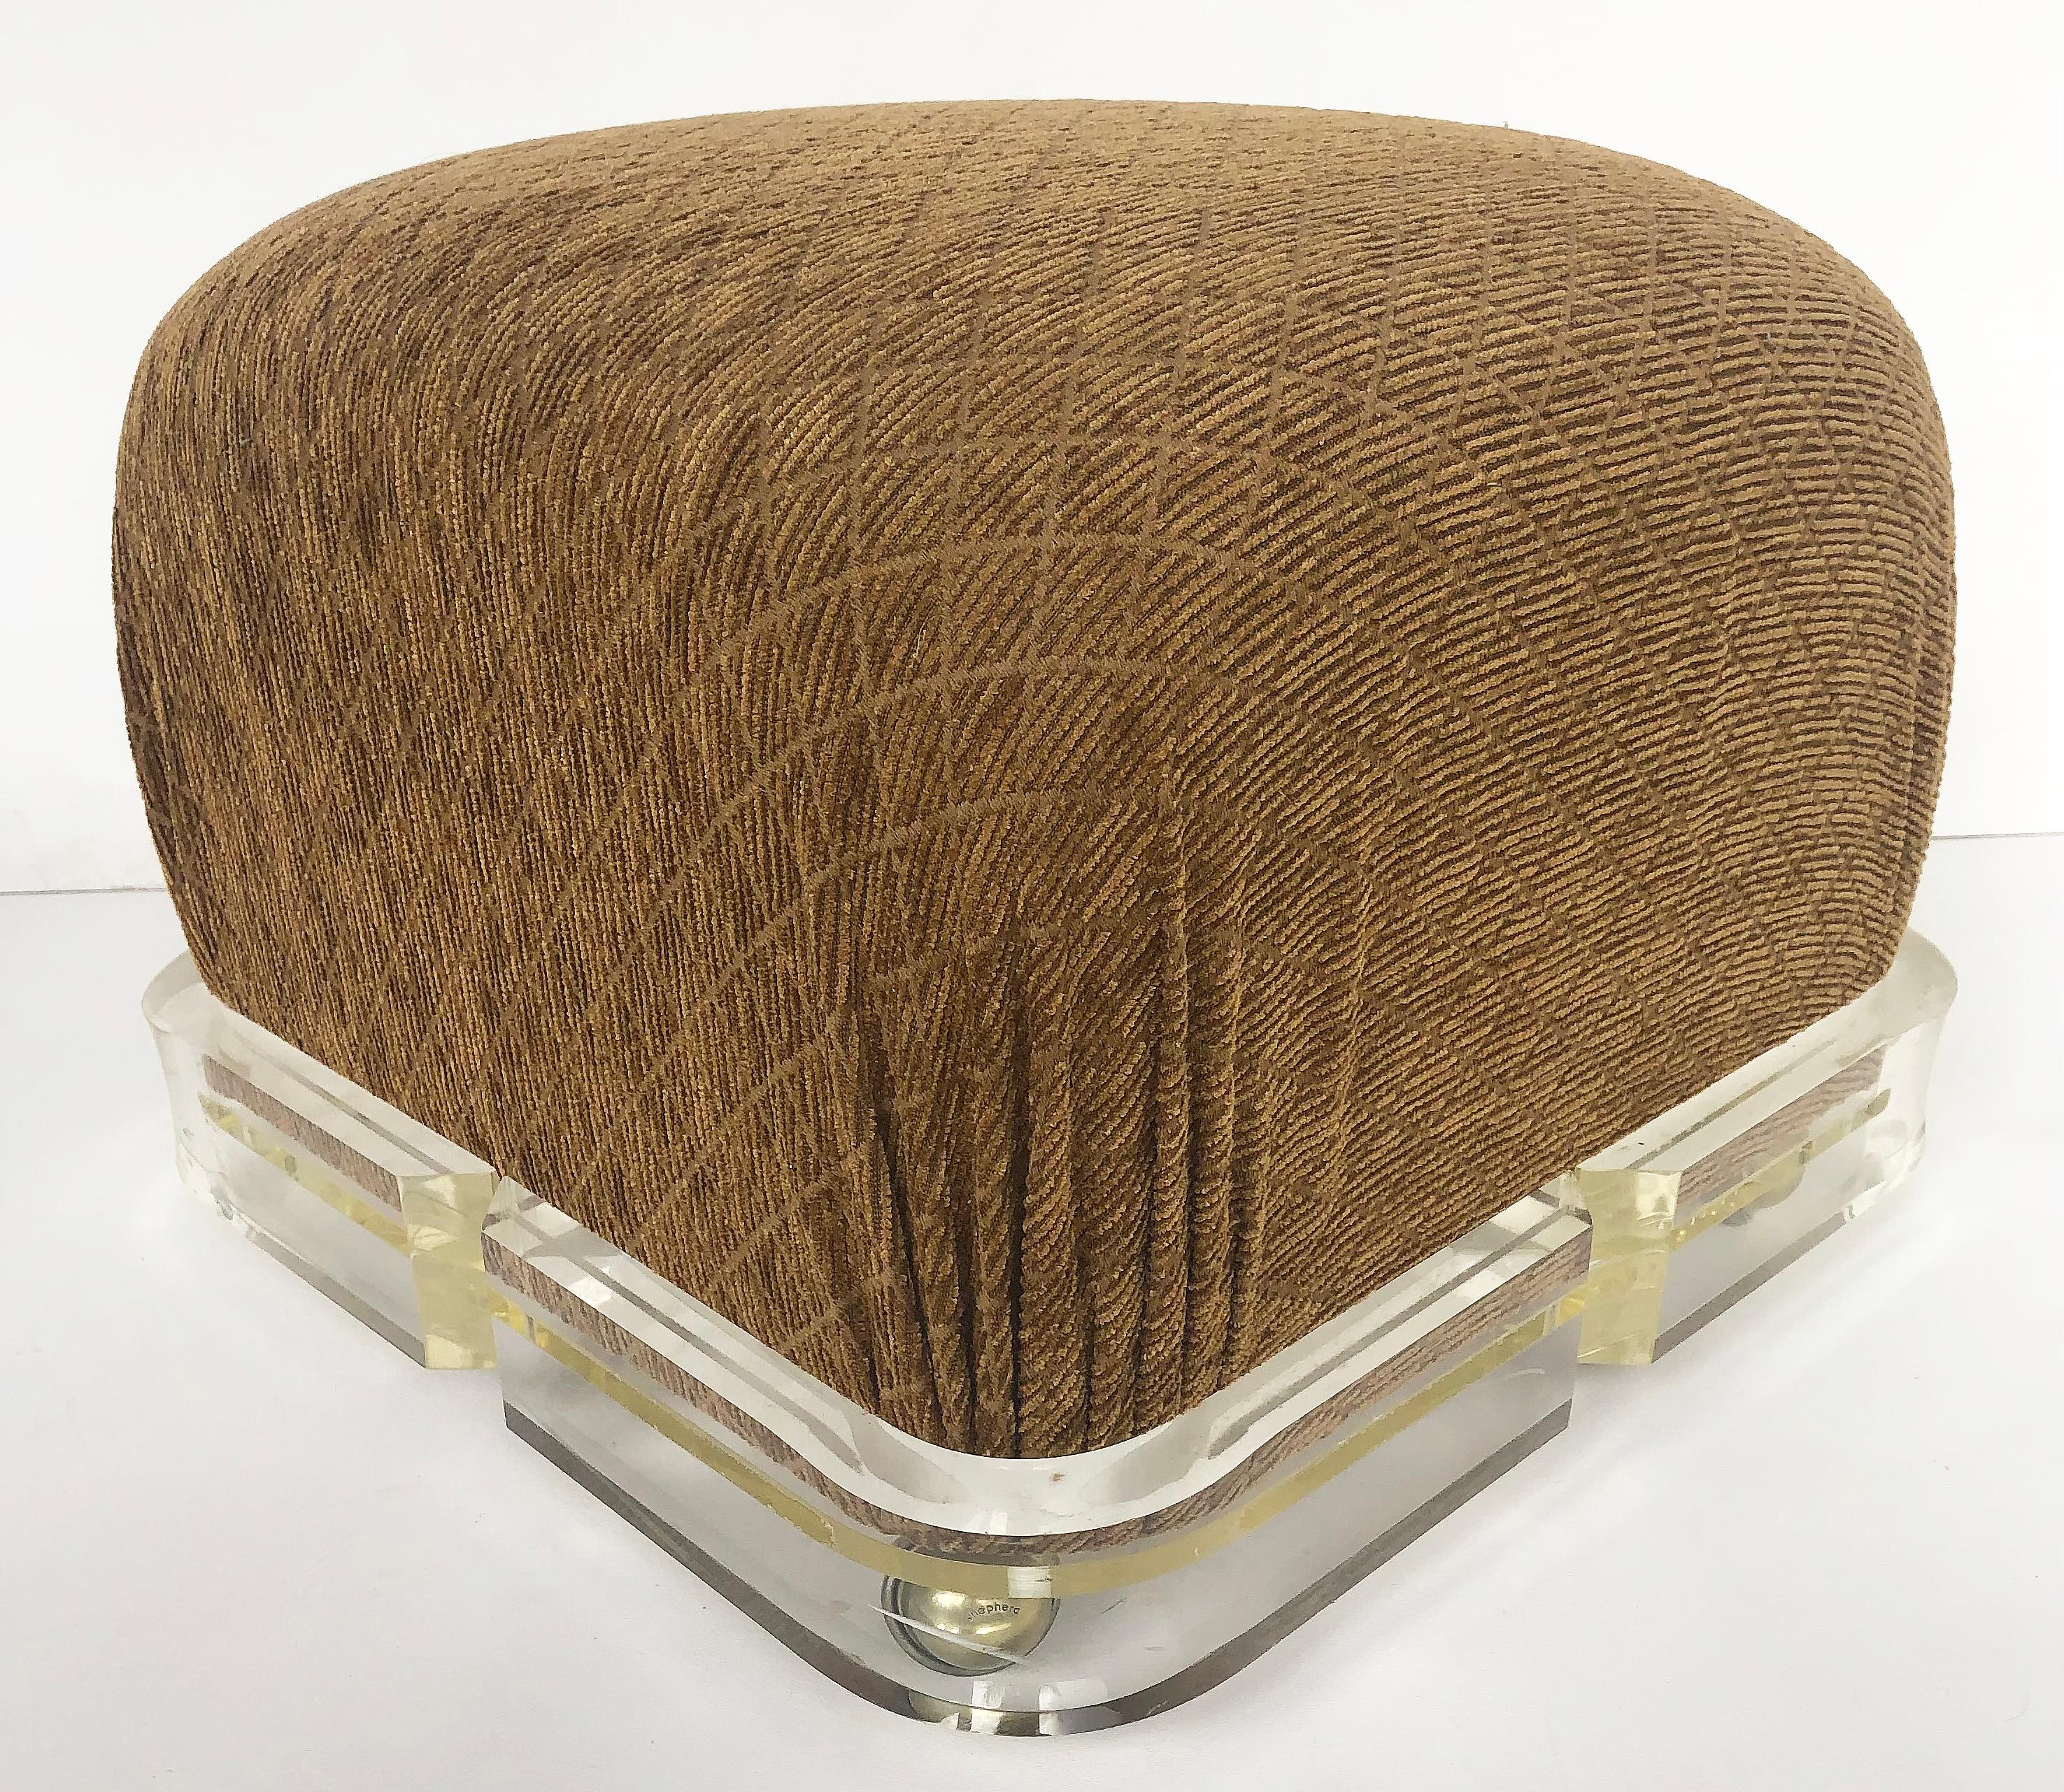 American Karl Springer Upholstered Brass/ Lucite Ottoman Poufs, 1980s on Casters, a pair